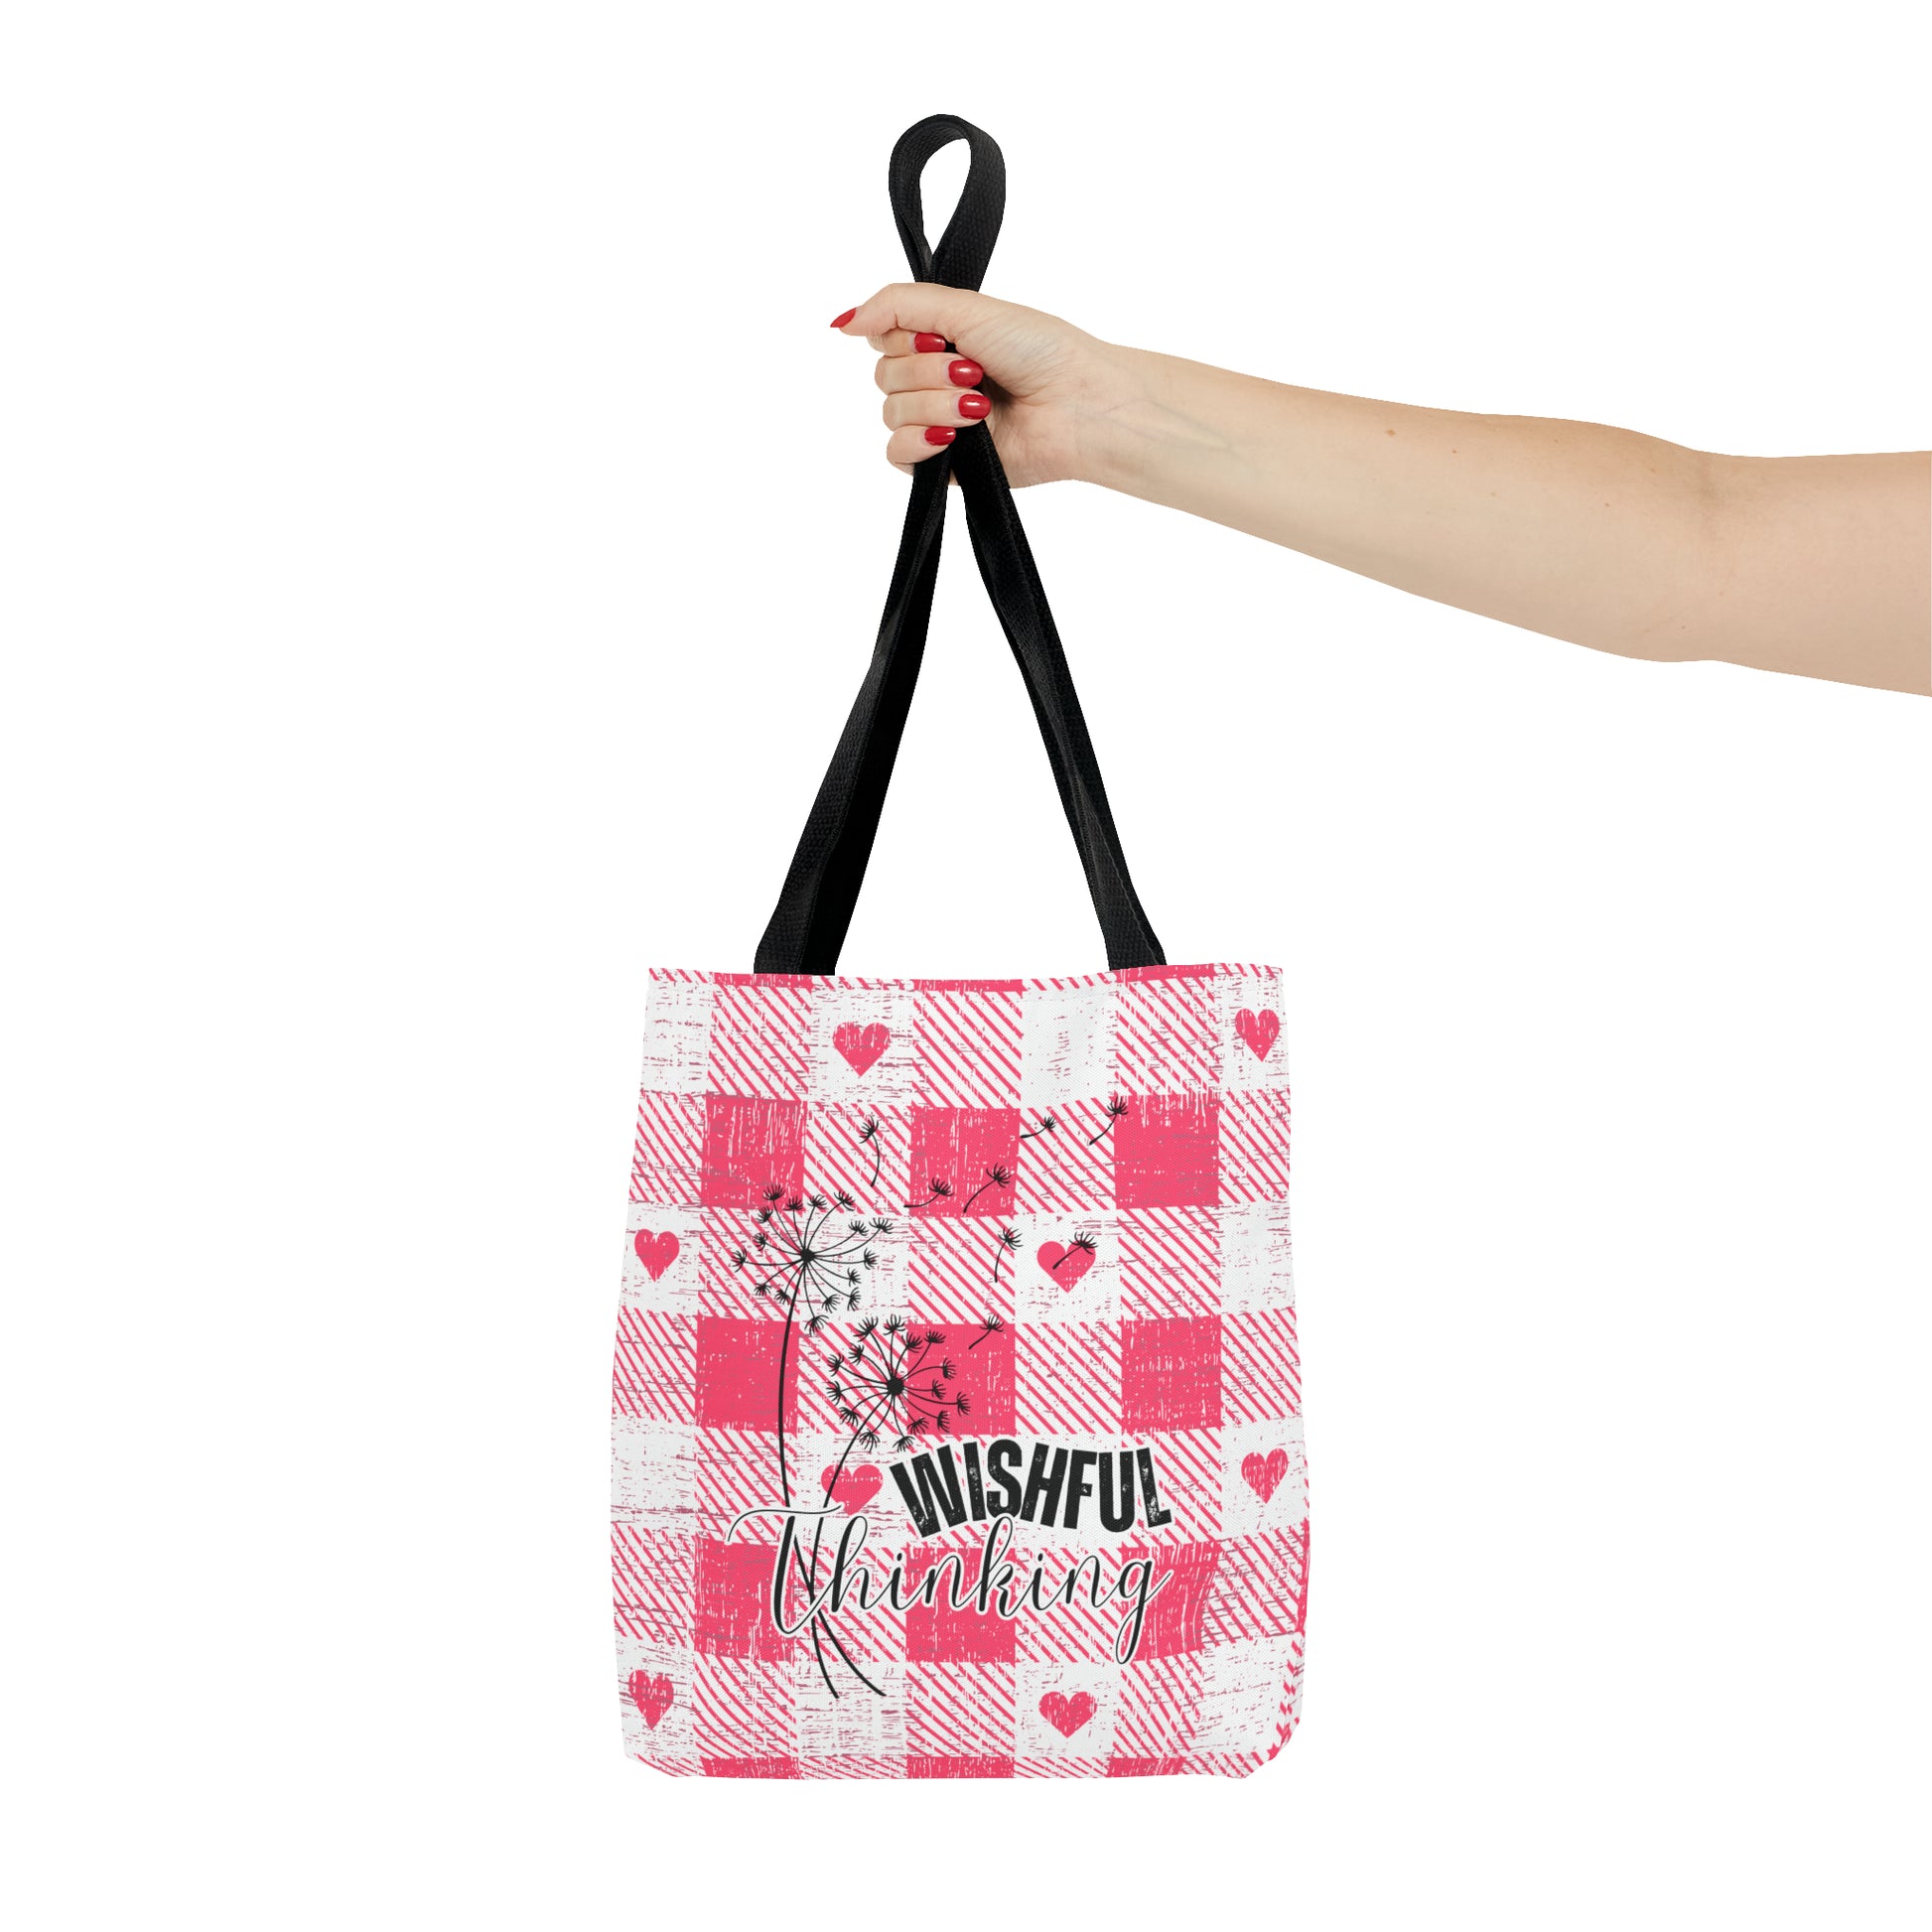 Wishful Thinking Pink Plaid Small Tote Bag: Chic and Compact Carryall in Stylish Design - Eddy and Rita